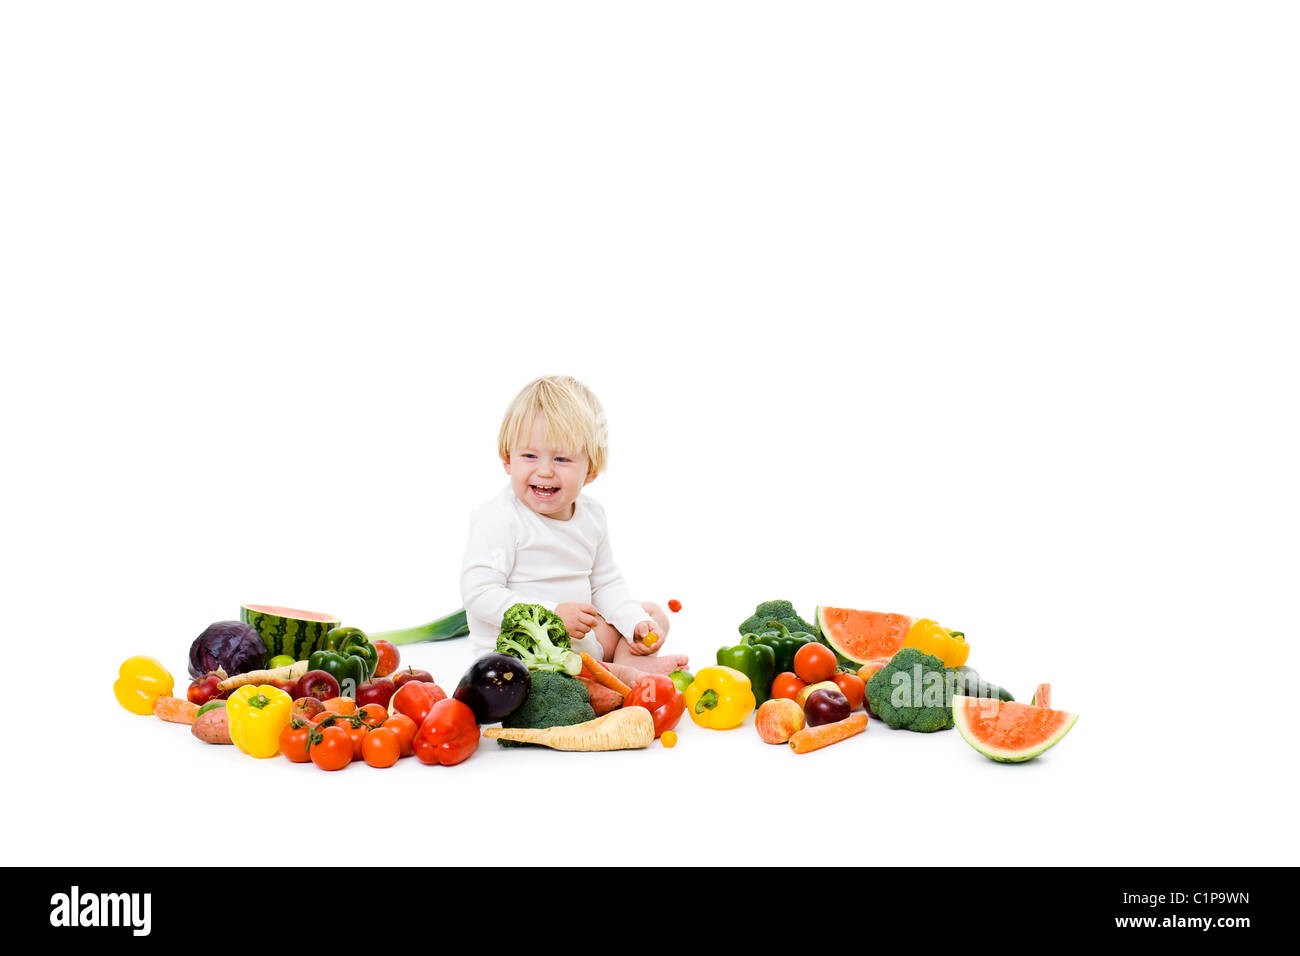 Studio shot of baby boy surrounded by fresh vegetables Stock Photo